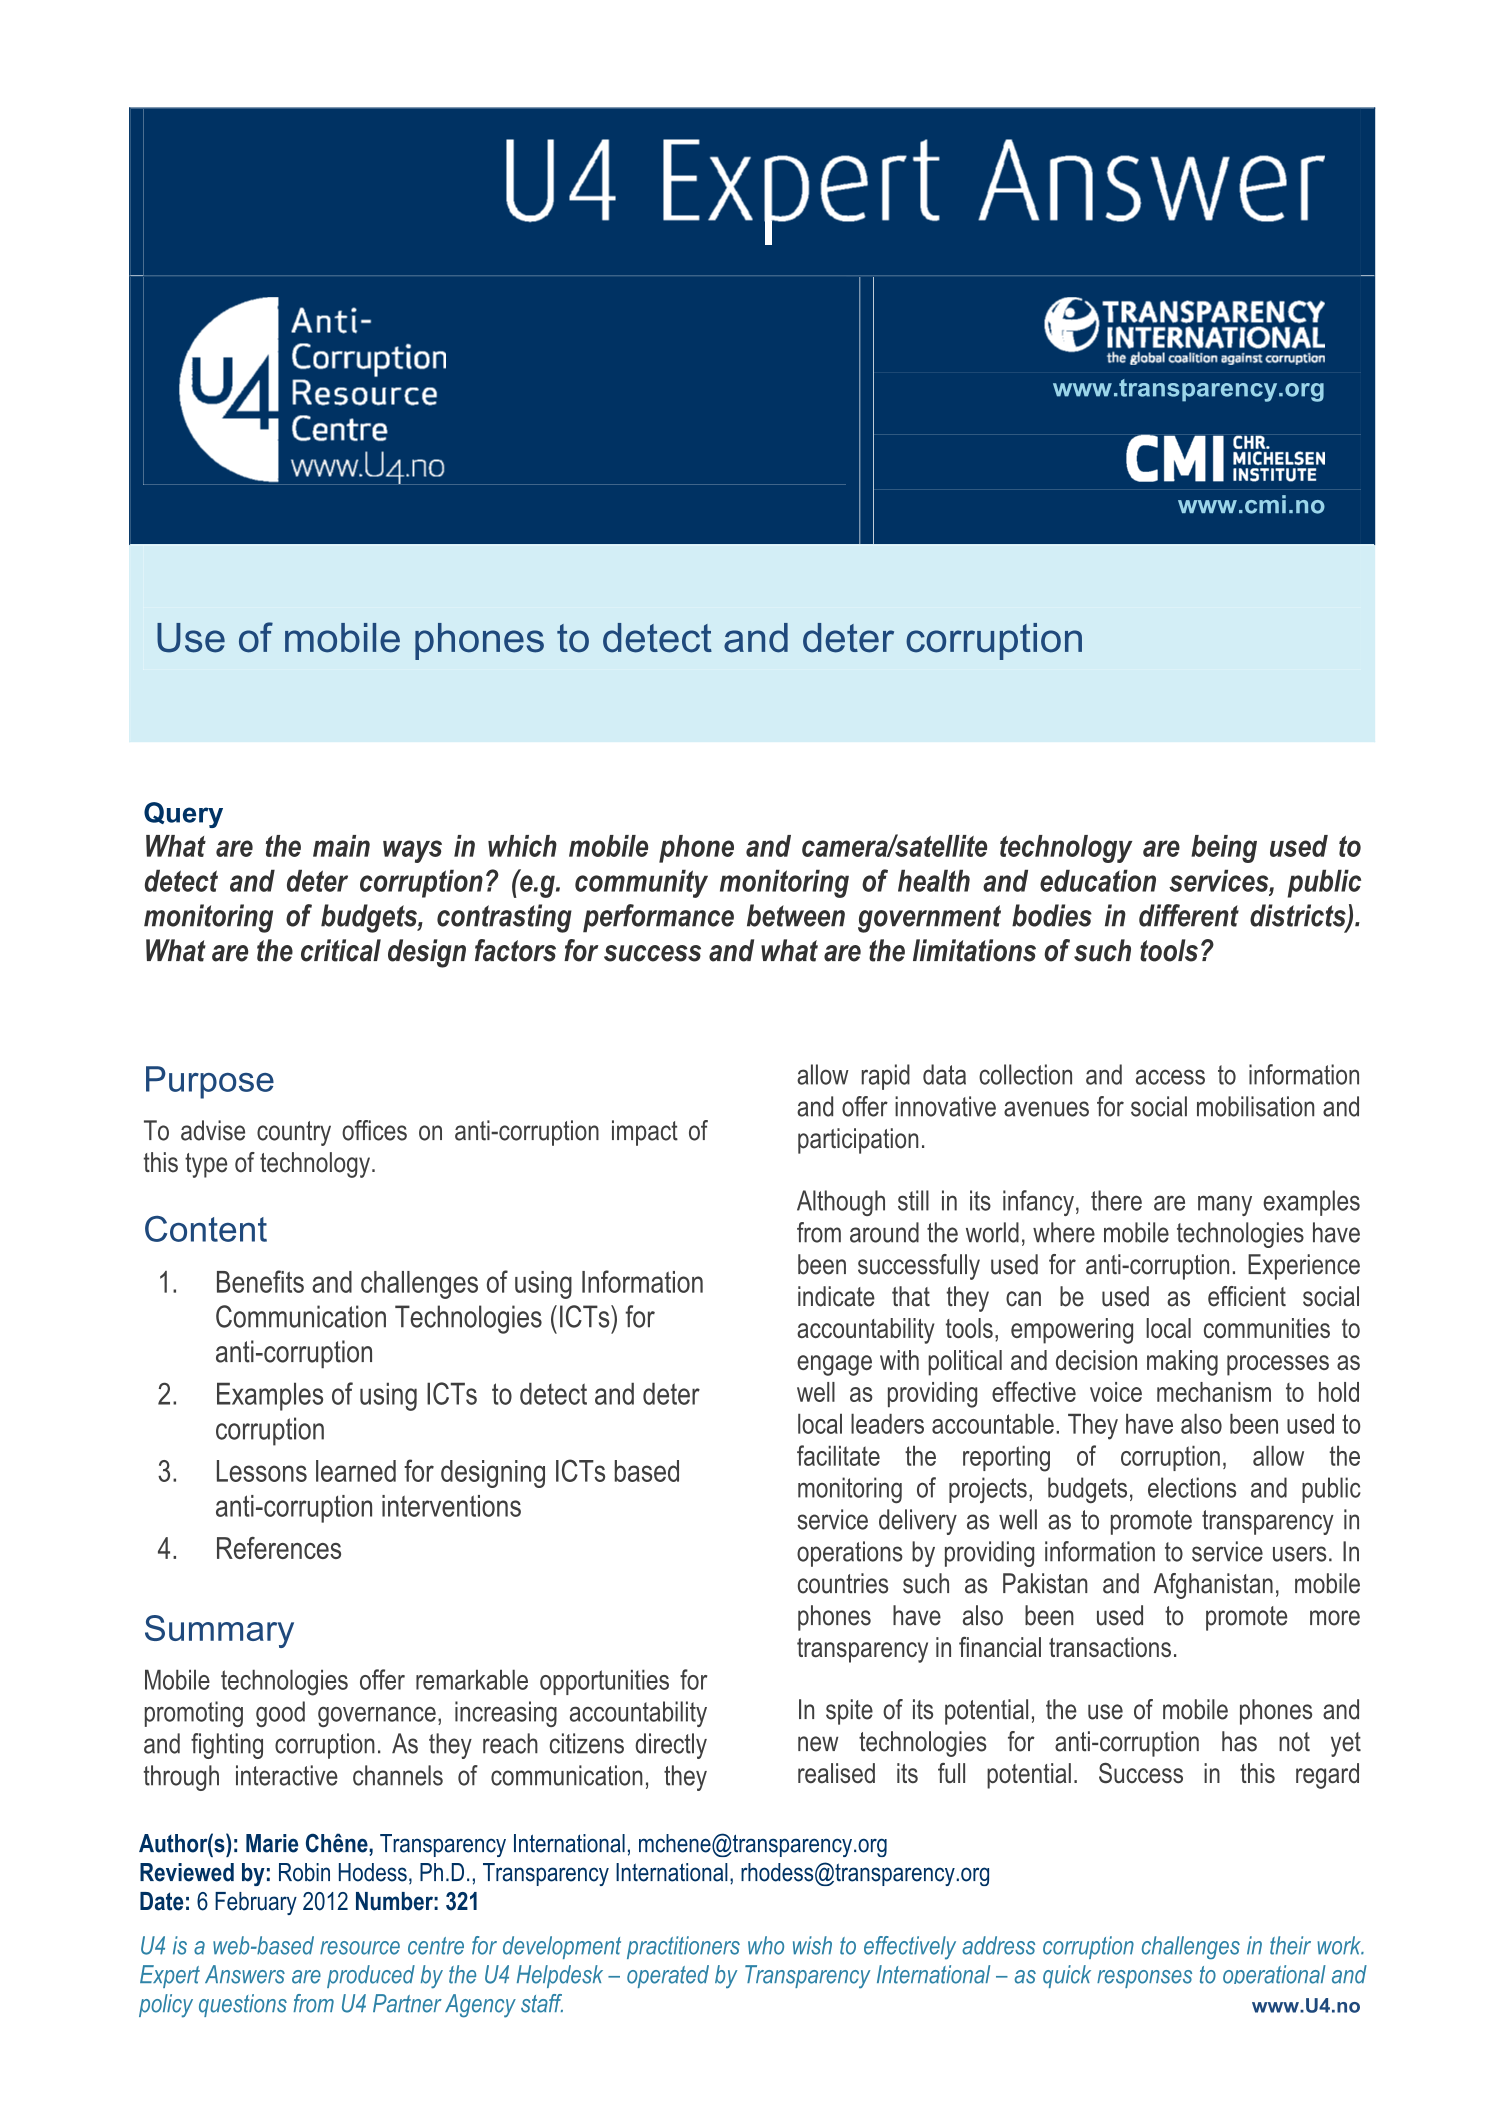 Use of mobile phones to detect and deter corruption  